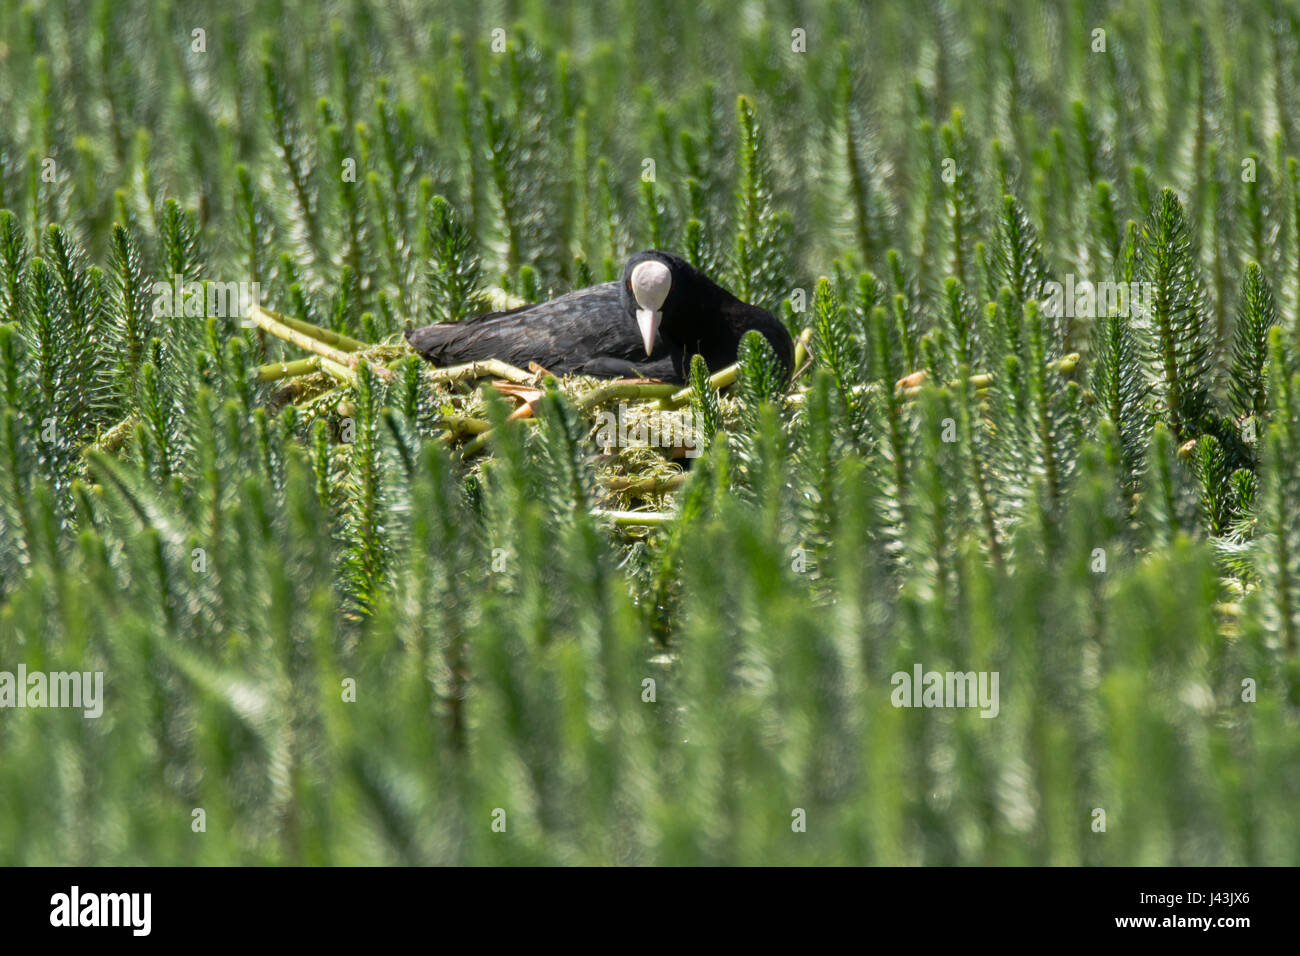 Coot (Fulica atra) sitting on nest amongst aquatic vegetation. Black water bird in the family Rallidae on nest constructed of plant material Stock Photo